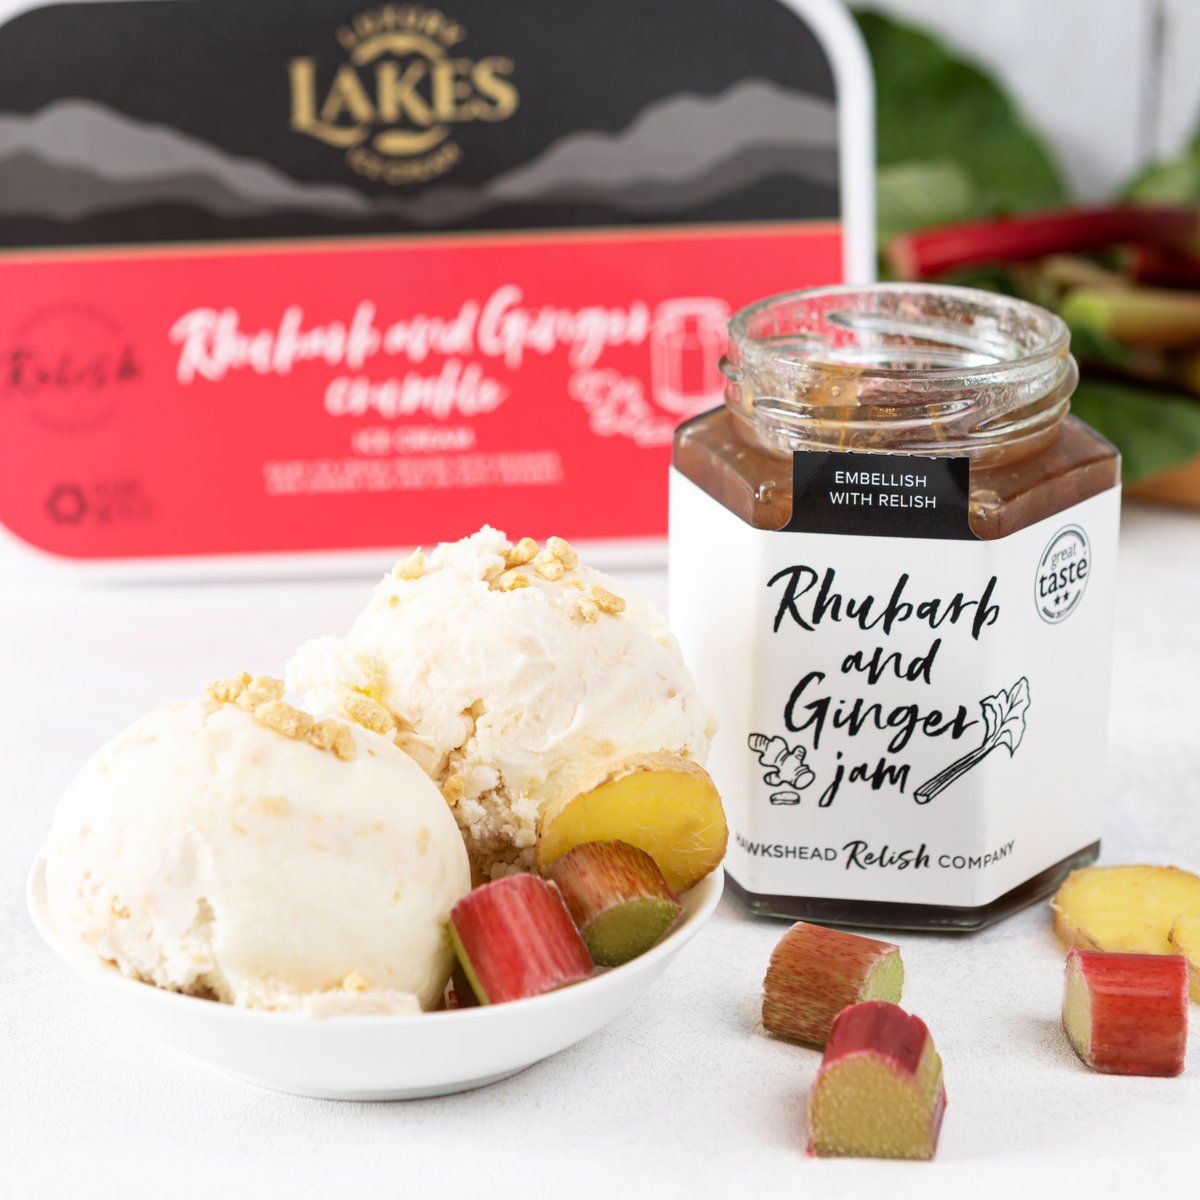 How do we eat our ice cream? With relish! 😋 Our #Rhubarb & Ginger Crumble Ice Cream is a flavour to savour 💛